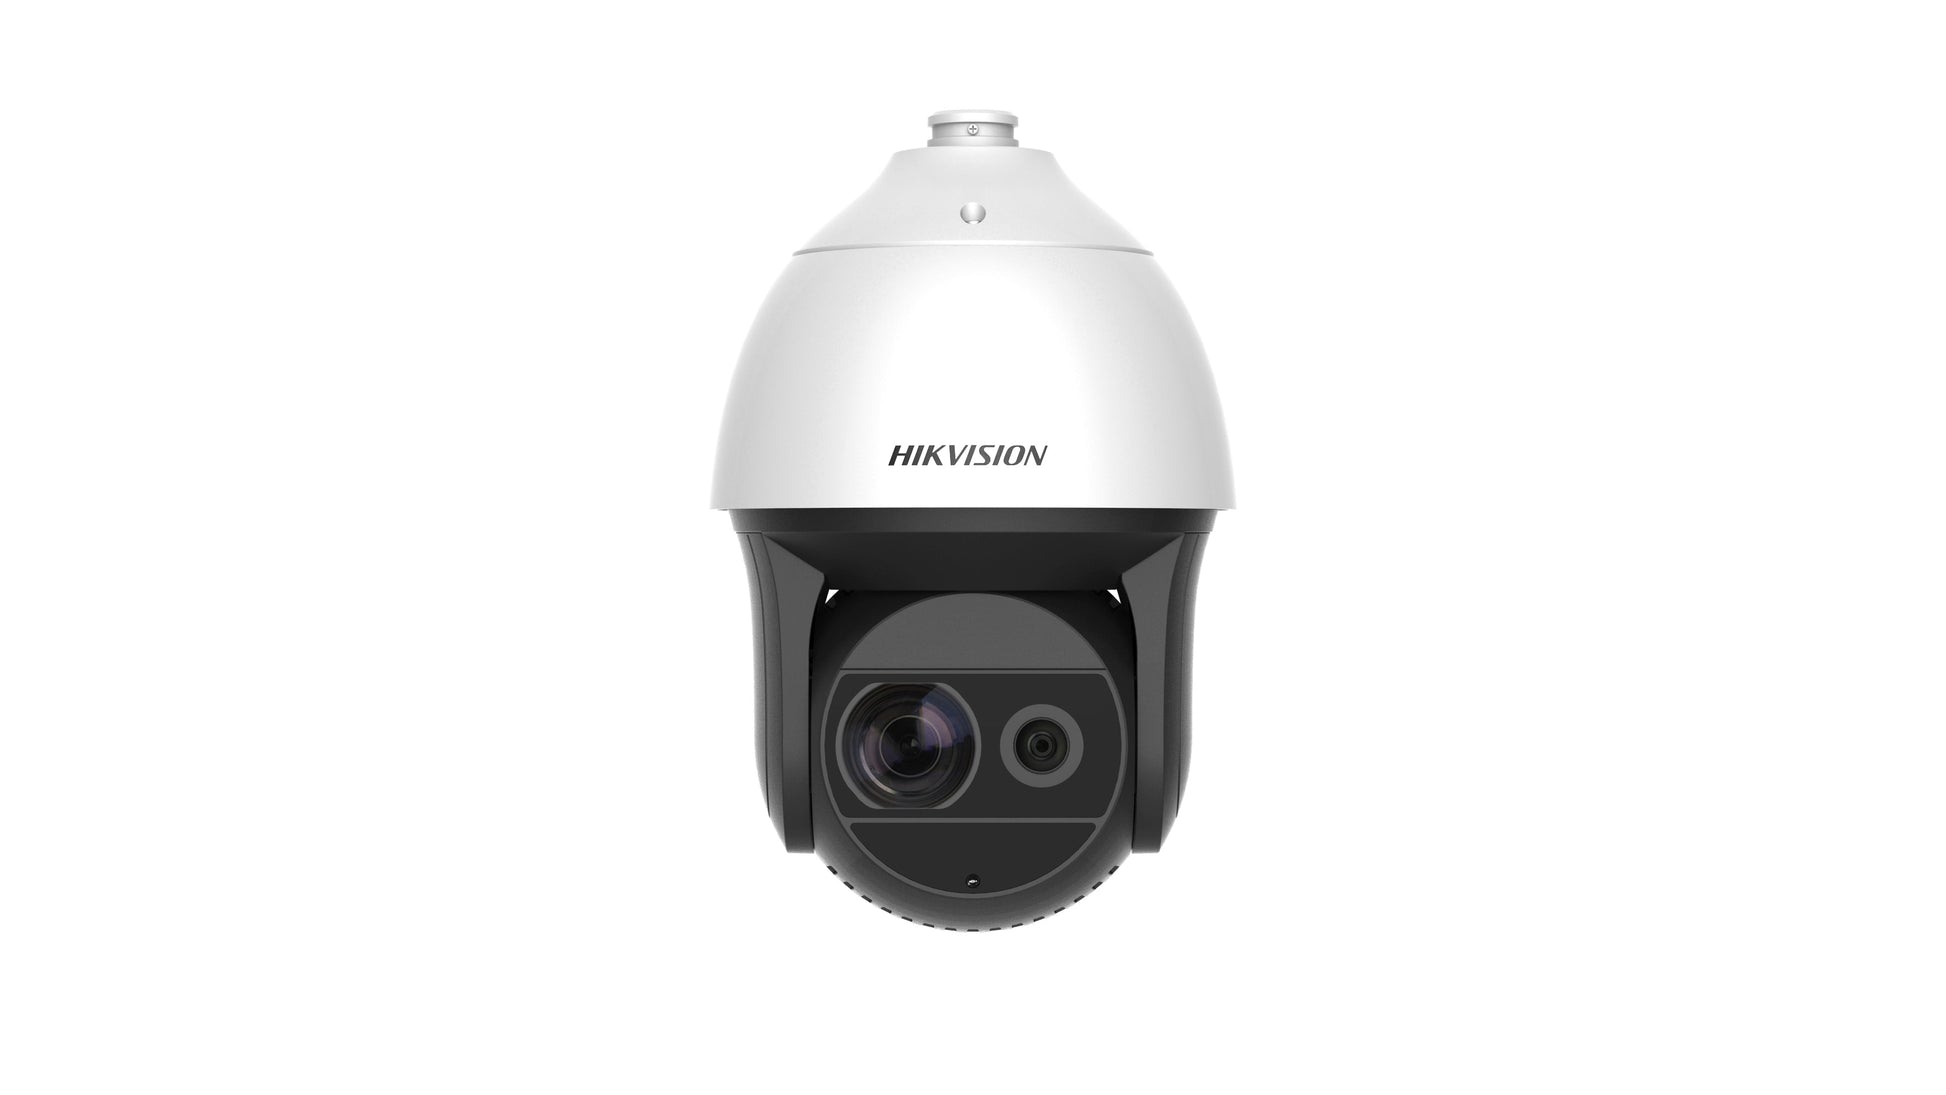 Hikvision Digital Technology Ds-2Df8836I5X-Aelw Security Camera Ip Security Camera Indoor & Outdoor Dome 4096 X 2160 Pixels Ceiling